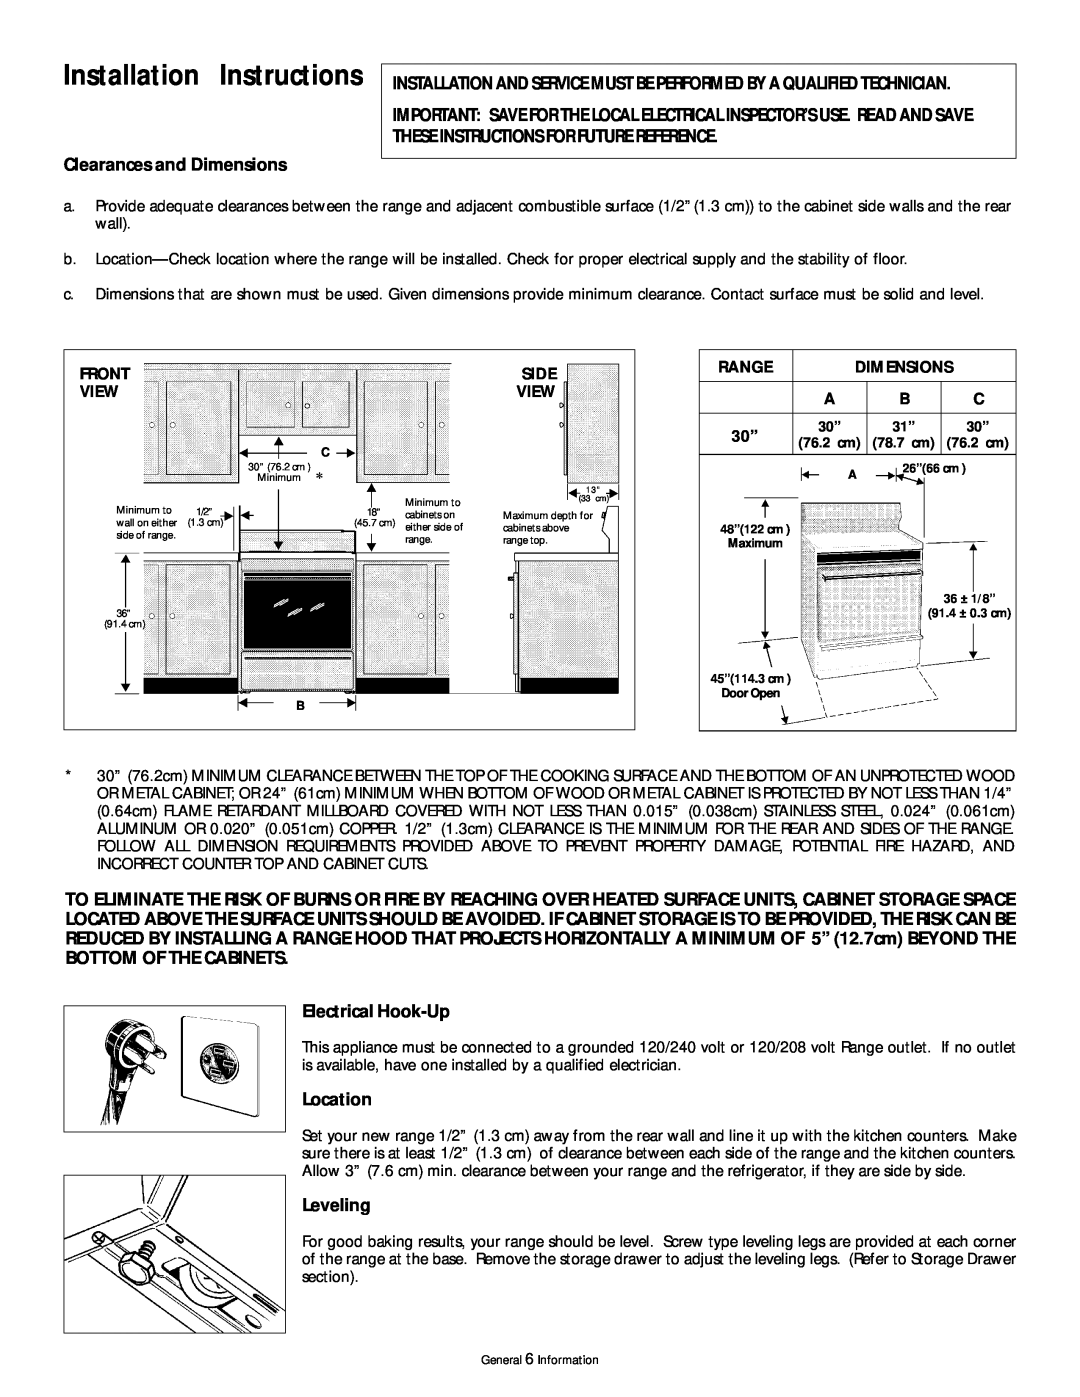 Frigidaire 318200407 Installation Instructions, Clearances and Dimensions, Electrical Hook-Up, Location, Leveling, Front 